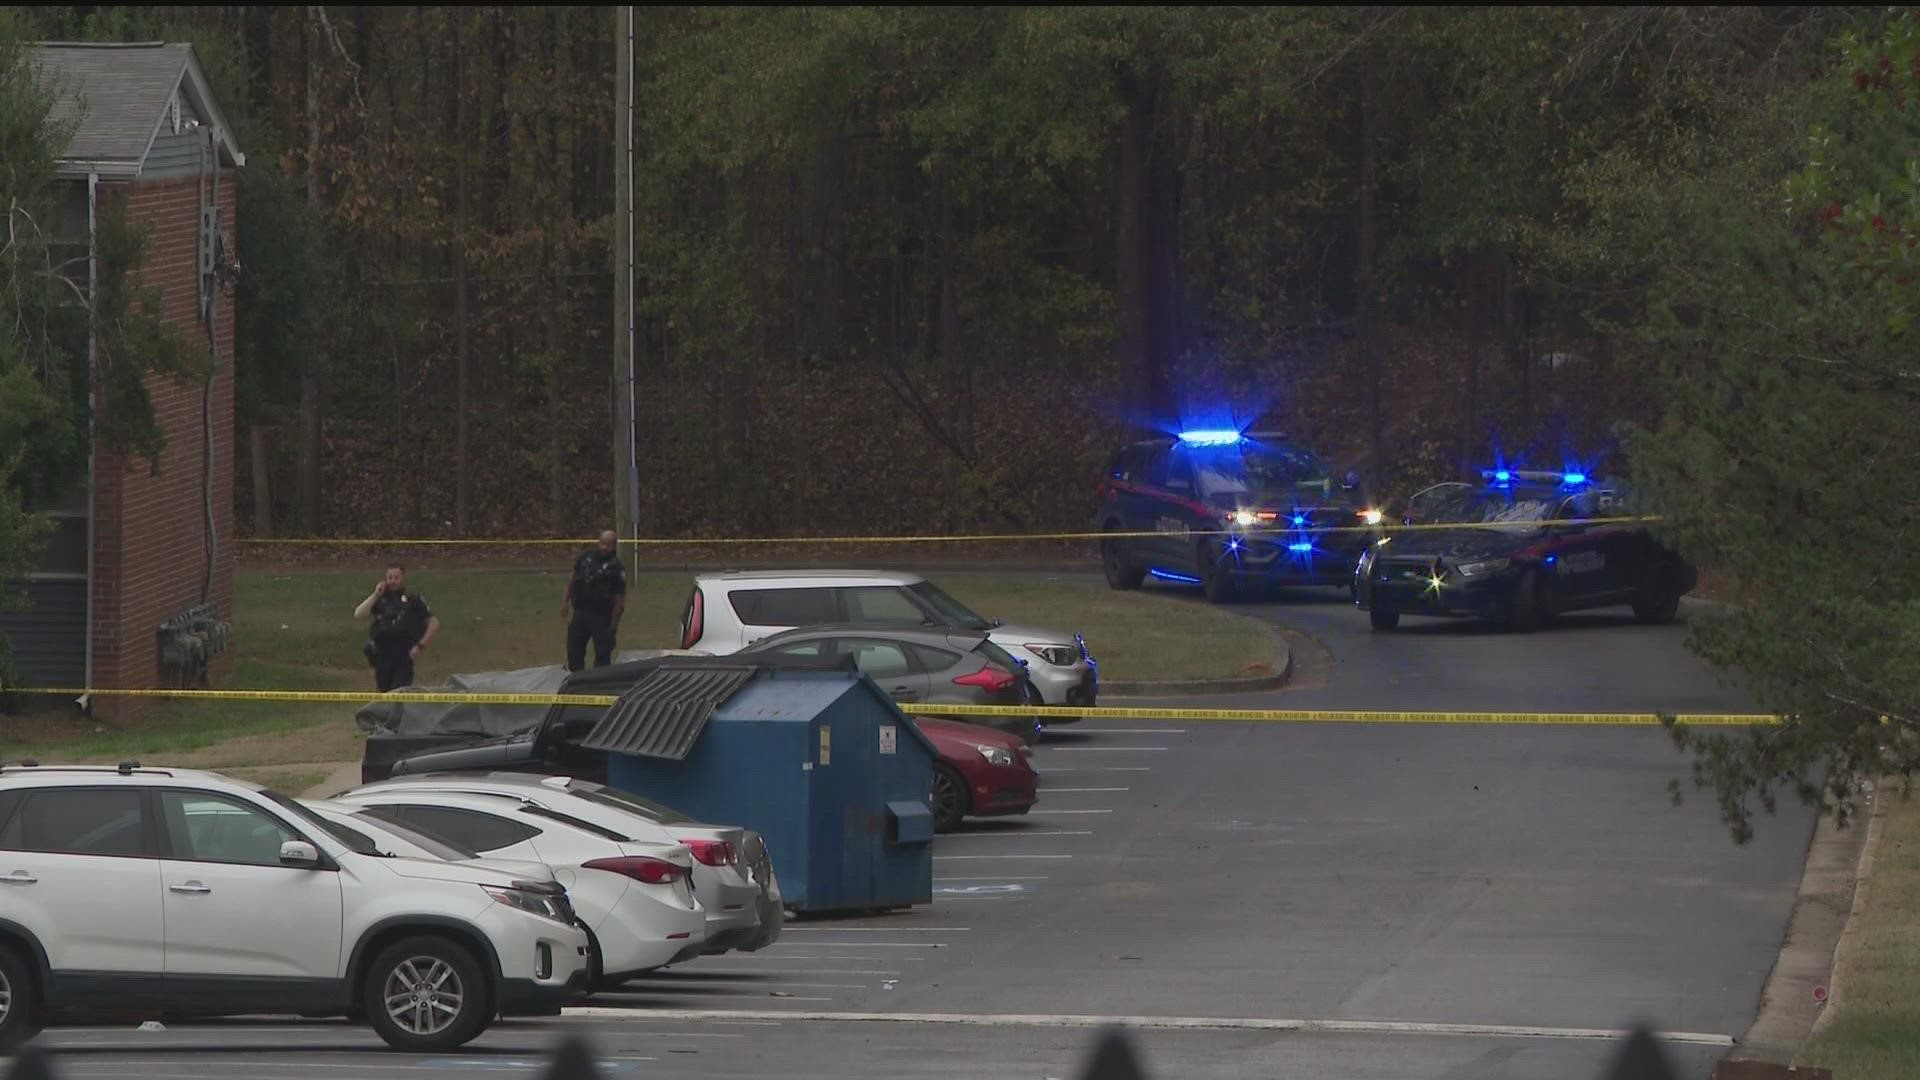 In the most recent shooting, a teen was killed at a gas station in DeKalb.